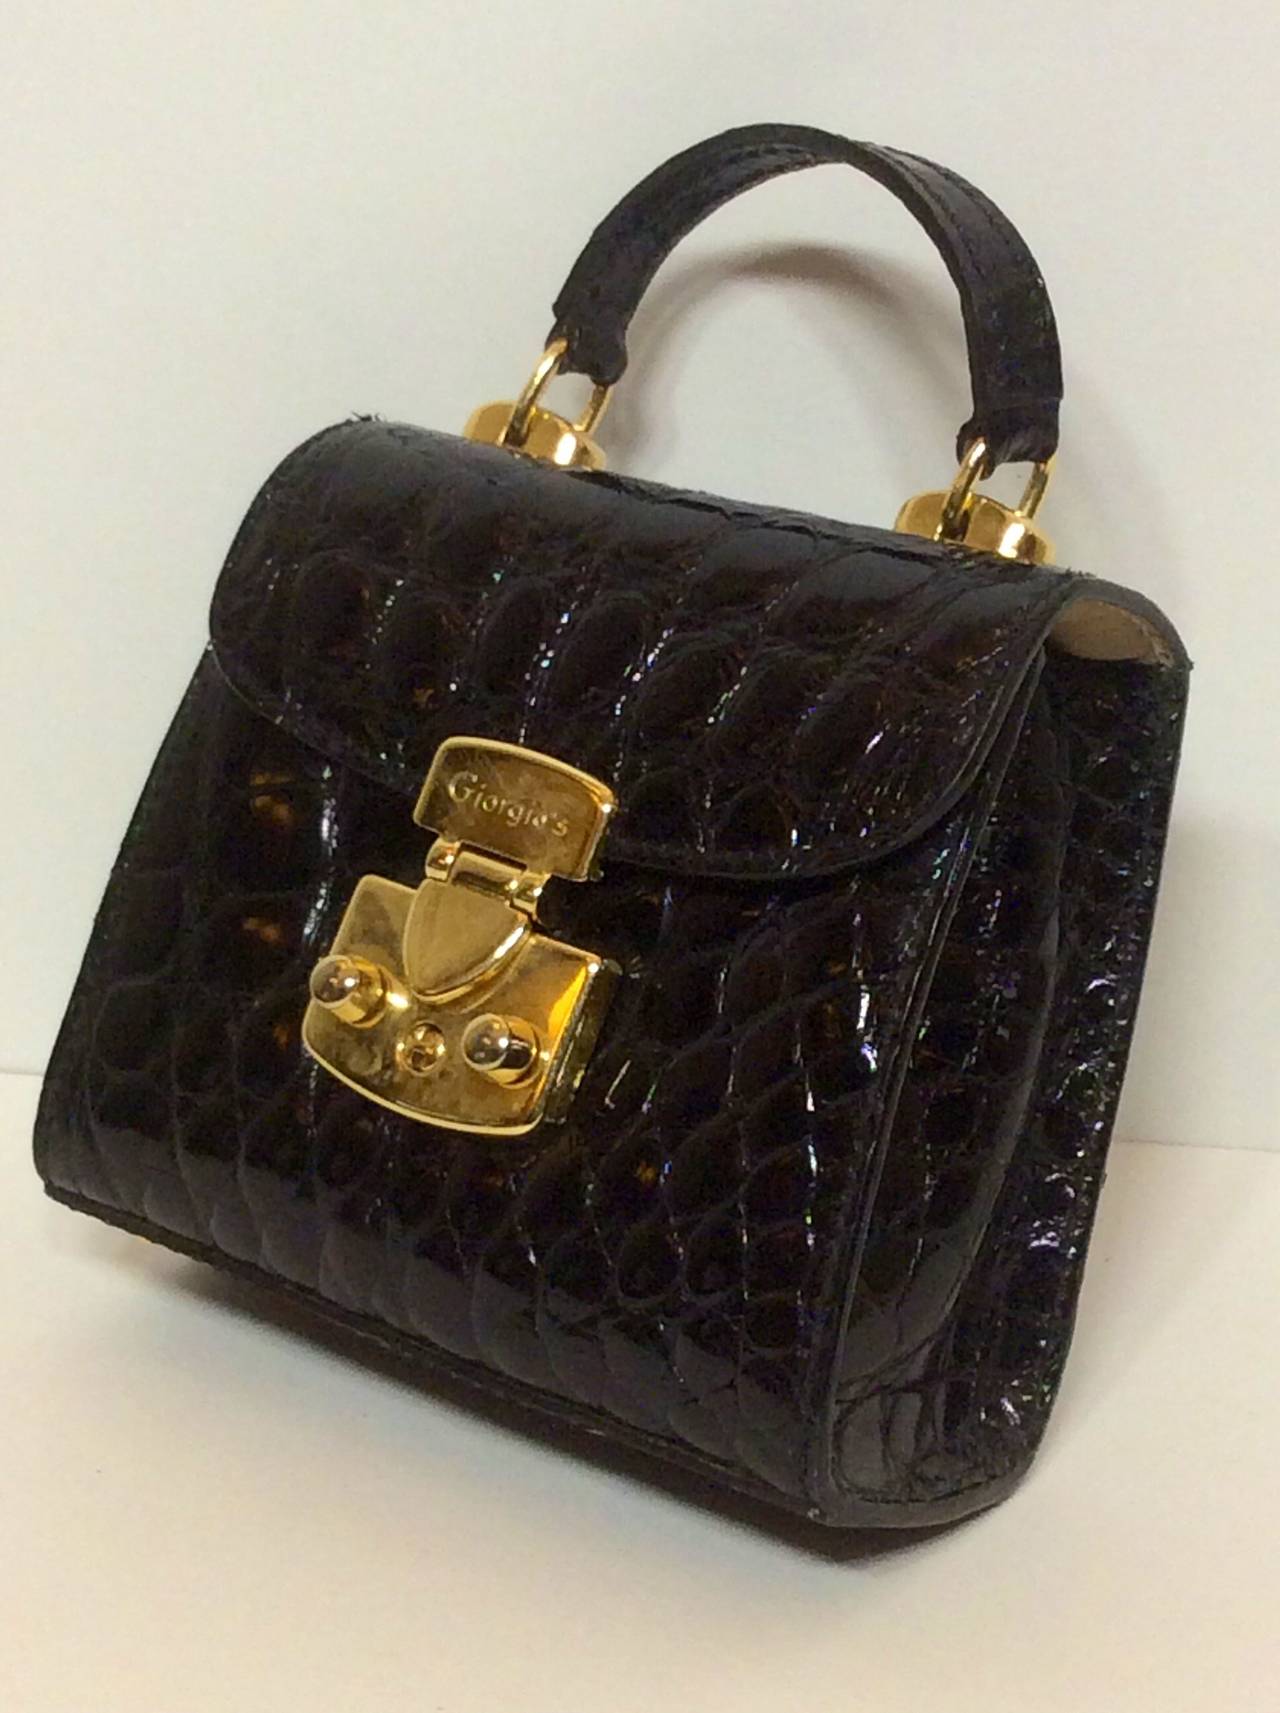 This is a sweet rare Giorgio's Palm Beach Baby Kelly black gator handbag with gold hardware and optional shoulder or cross body strap. Immaculate condition!
Measures:
4.5